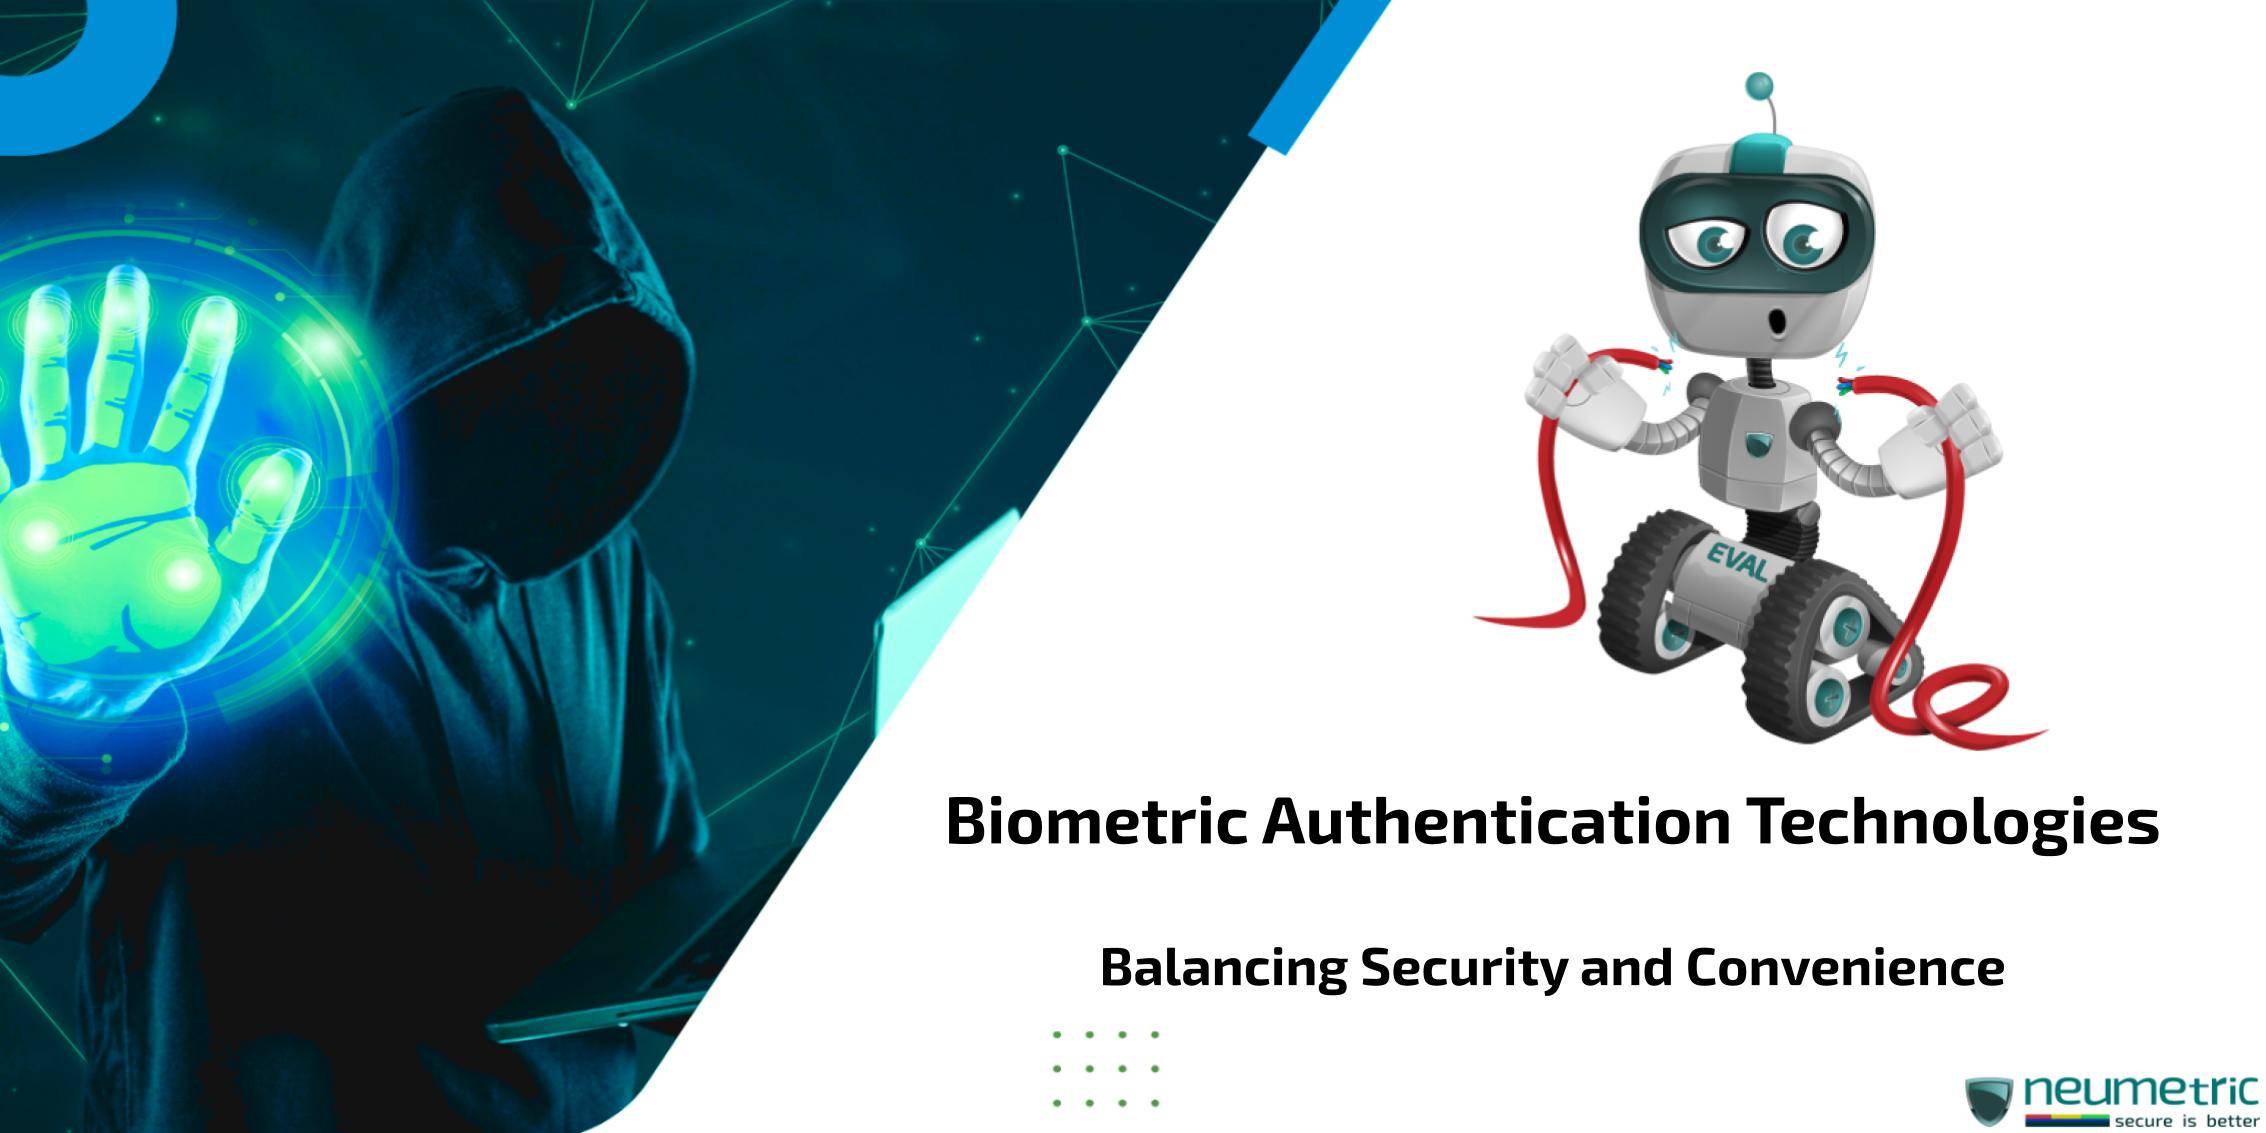 Biometric Authentication Technologies: Balancing Security & Convenience